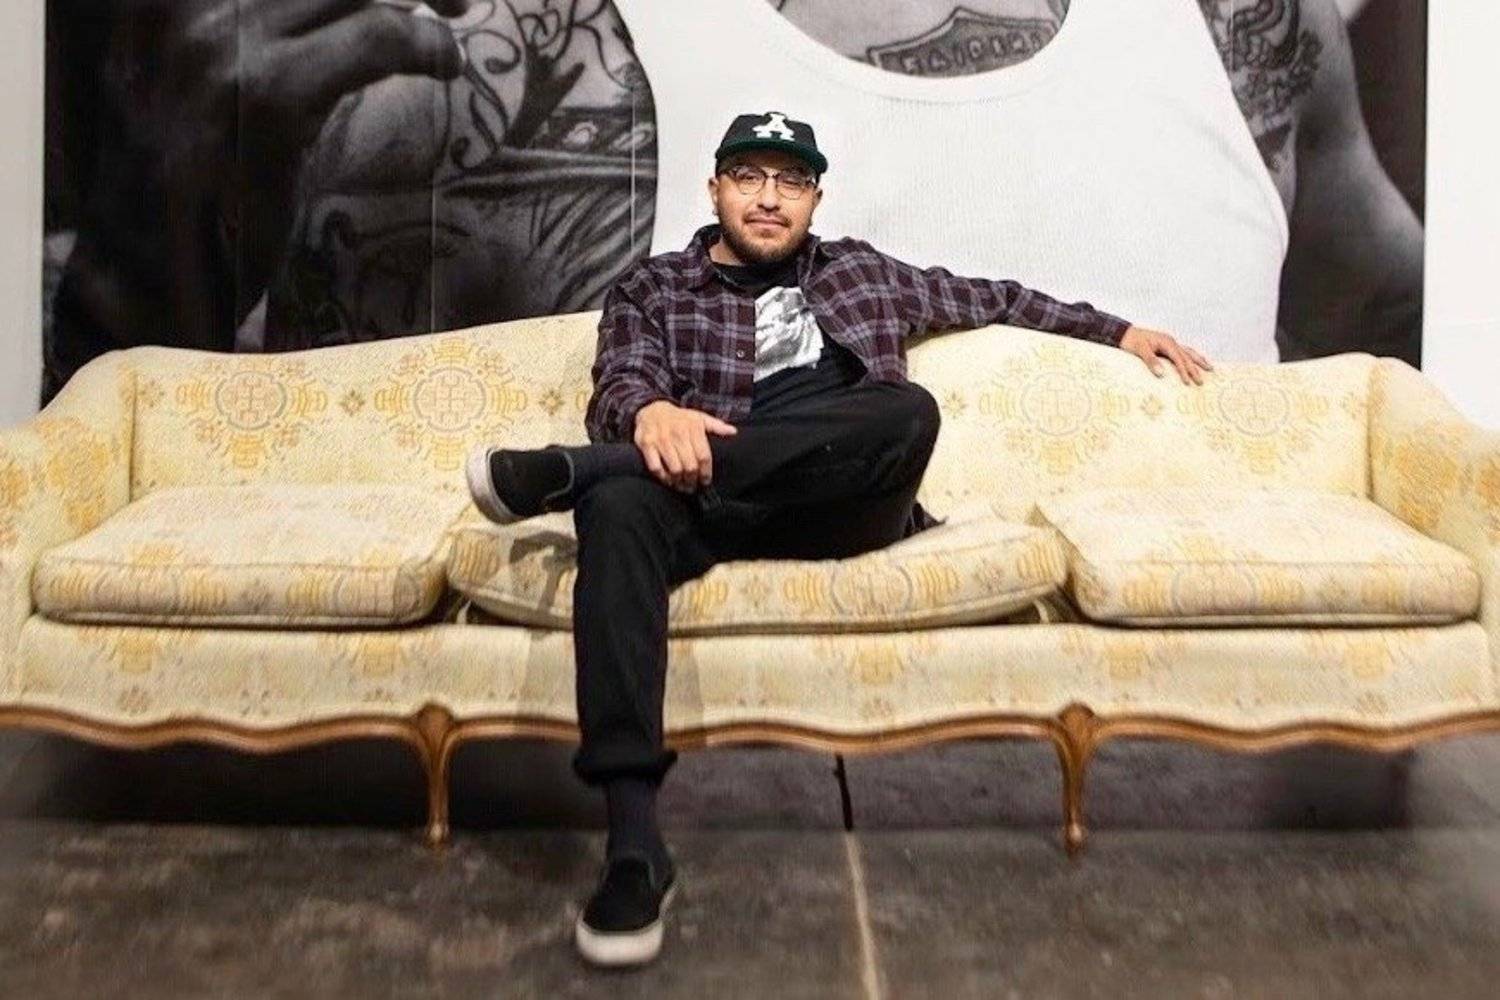 A photo of documentary photographer Juan Fuentes, sitting in the center of a yellow upholstered couch. There is a large-scale floor-to-ceiling black and white image on the wall behind him.